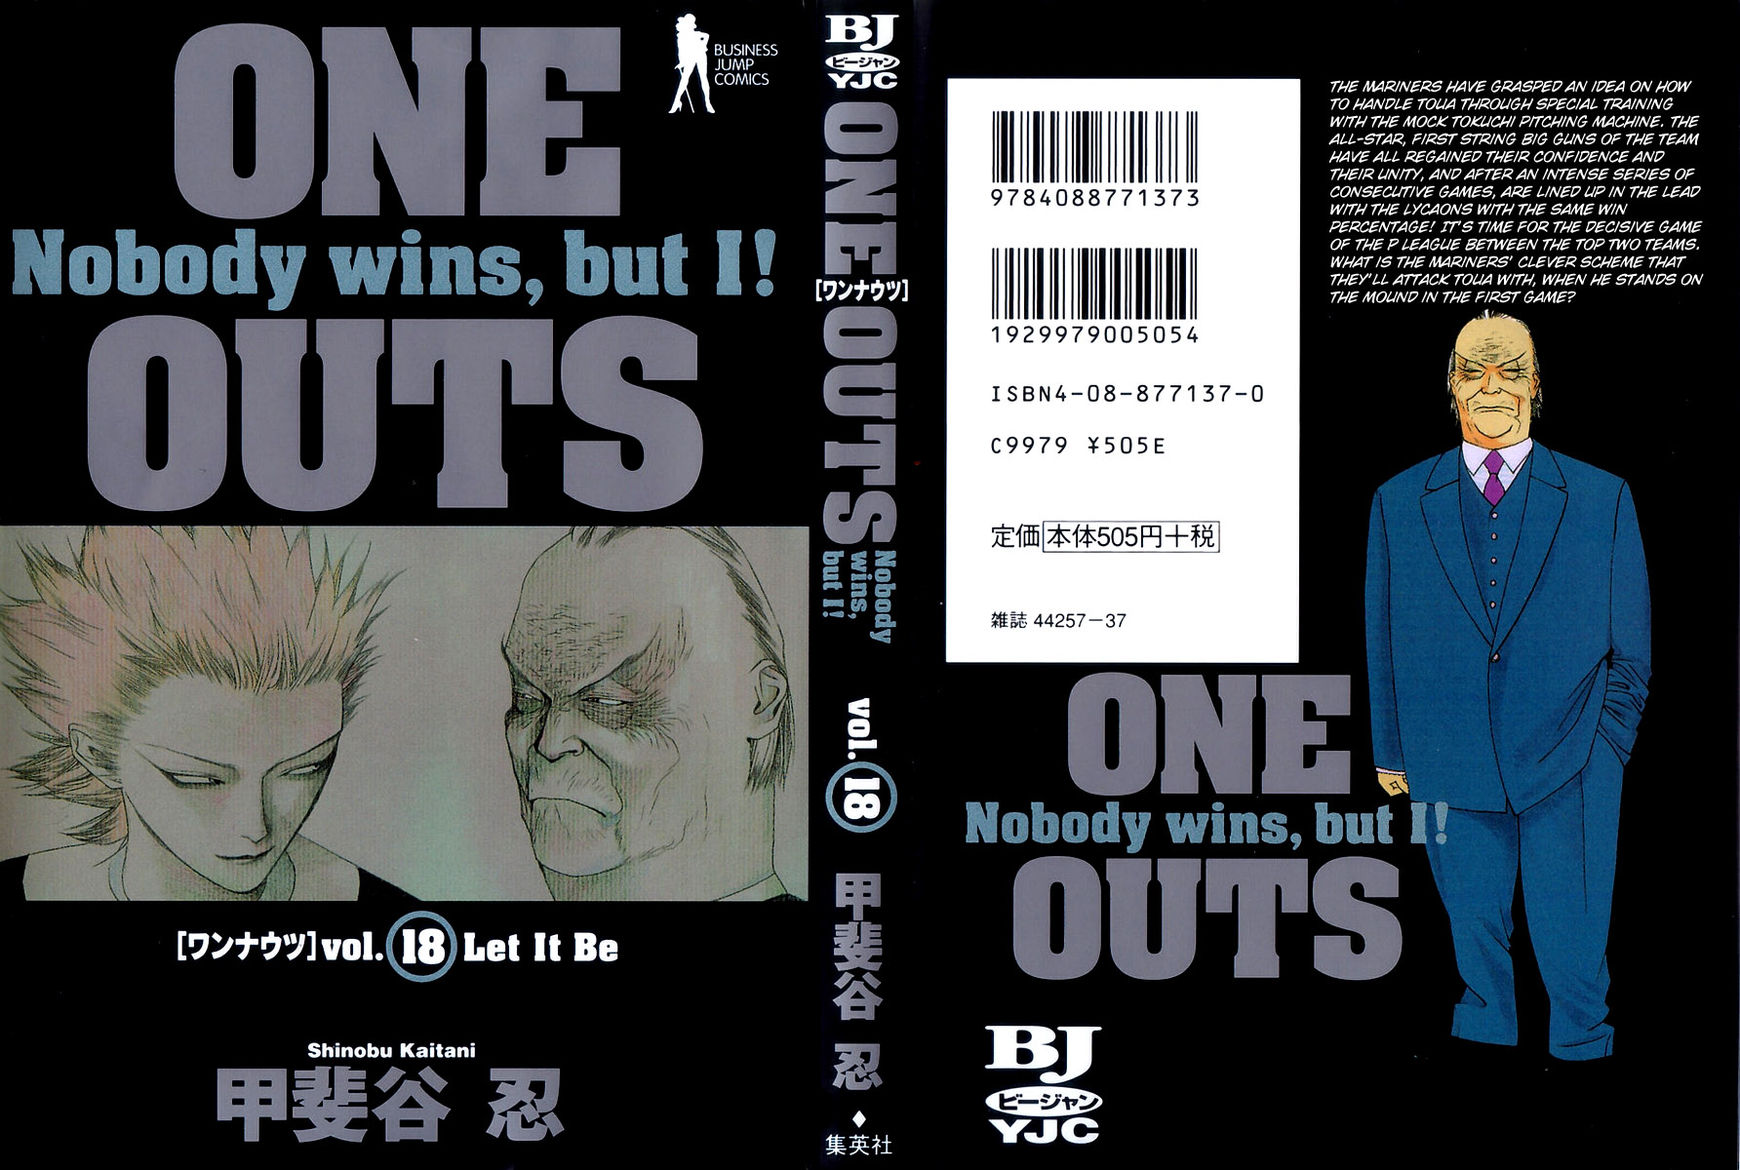 One Outs 151